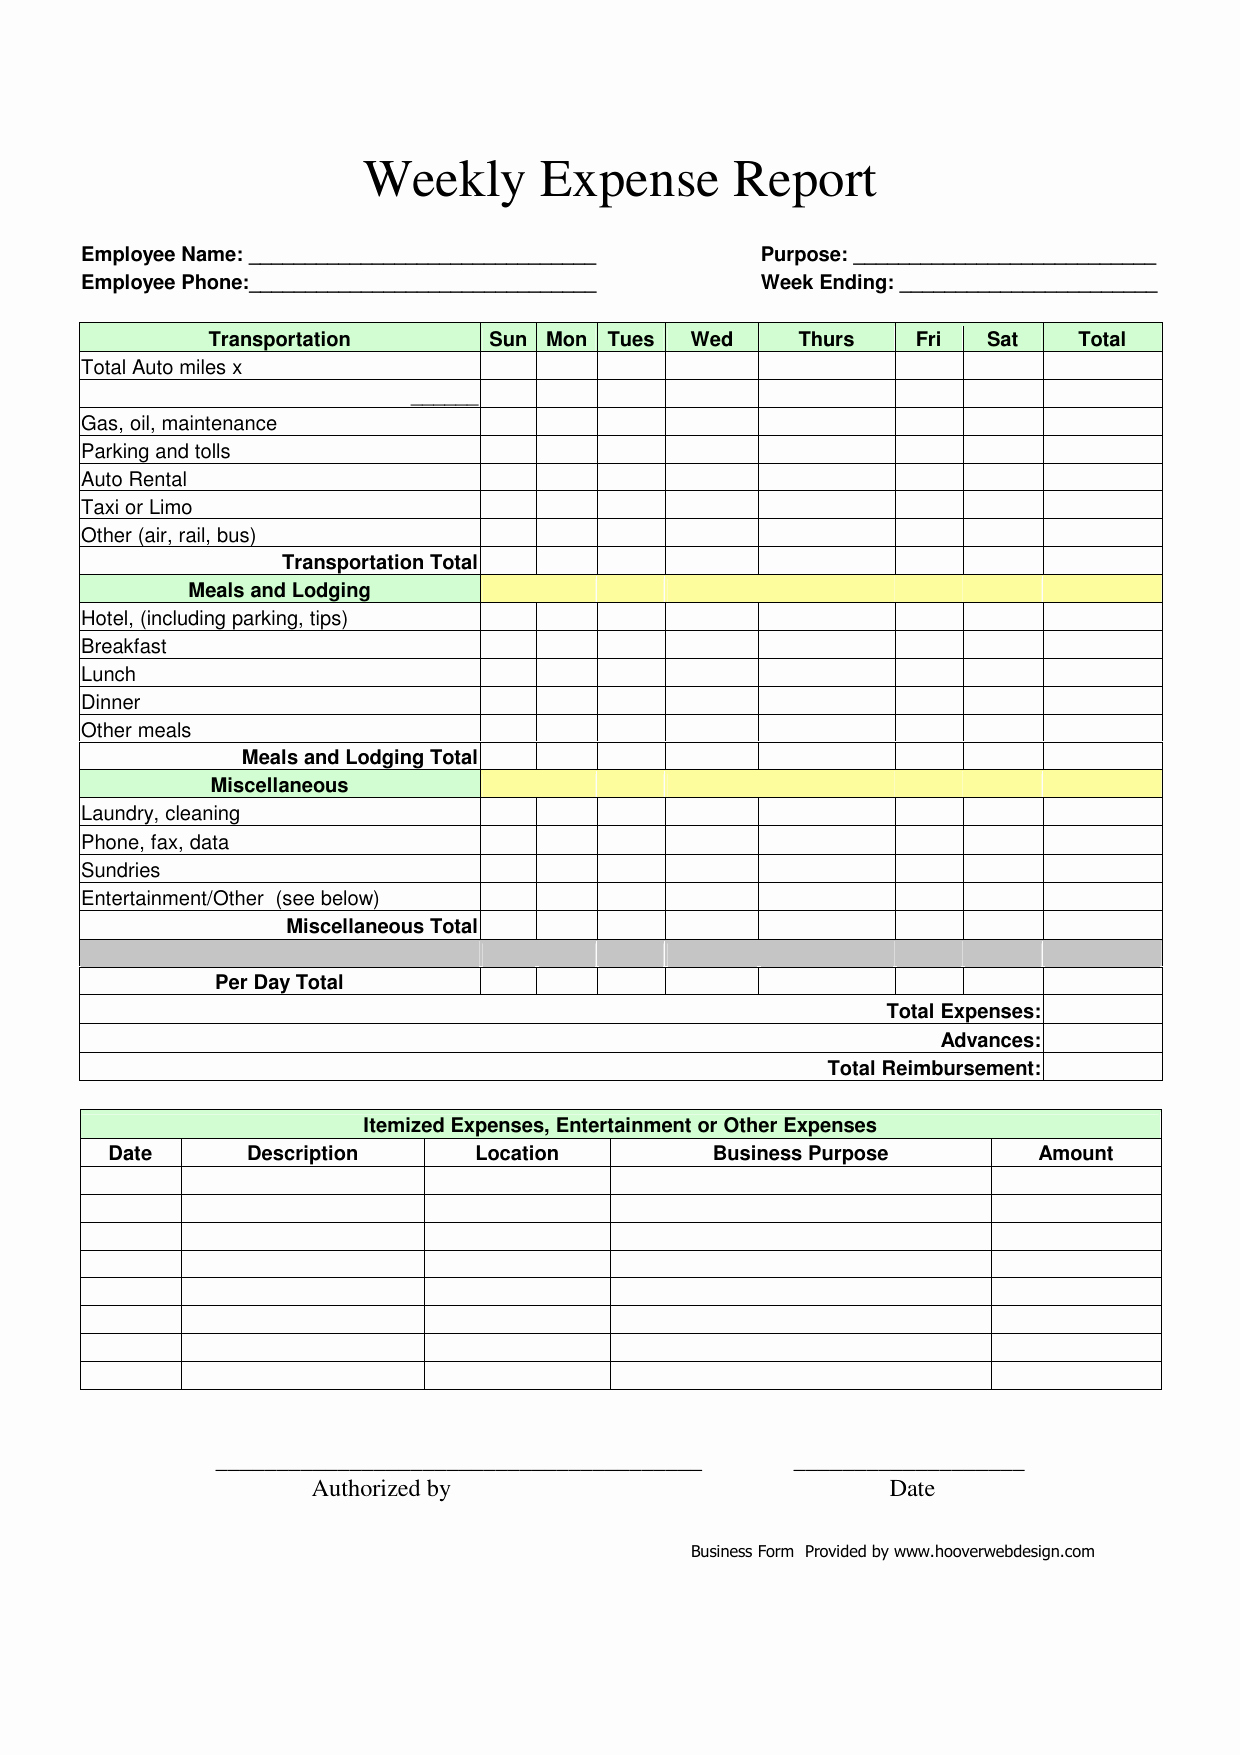 Free Excel Expense Report Template Awesome Download Weekly Expense Report form Pdf